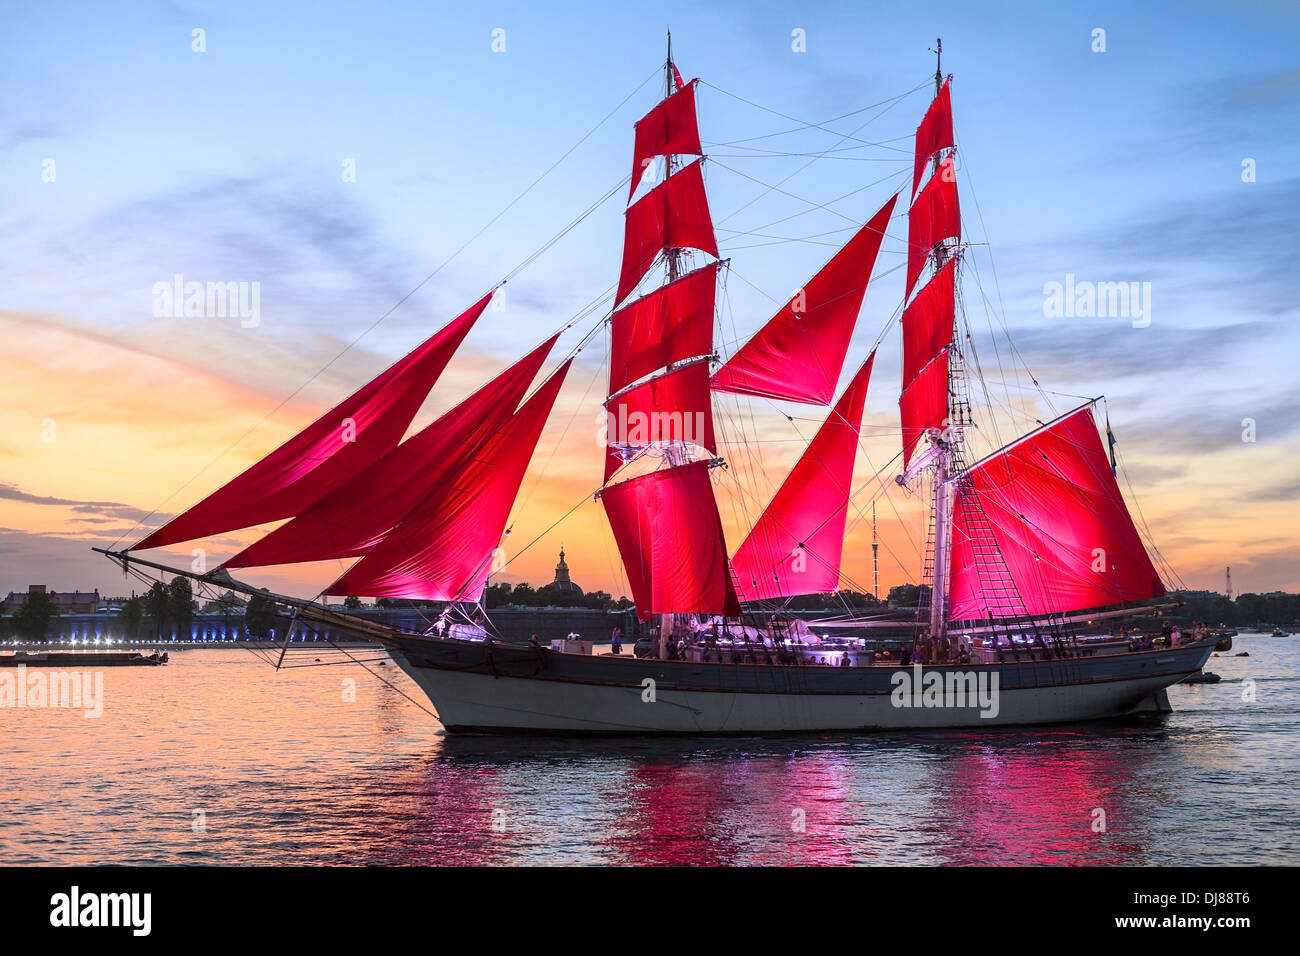 Celebration Scarlet Sails show during the White Nights Festival, St. Petersburg, Russia. Vessel over sunset sky Stock Photo